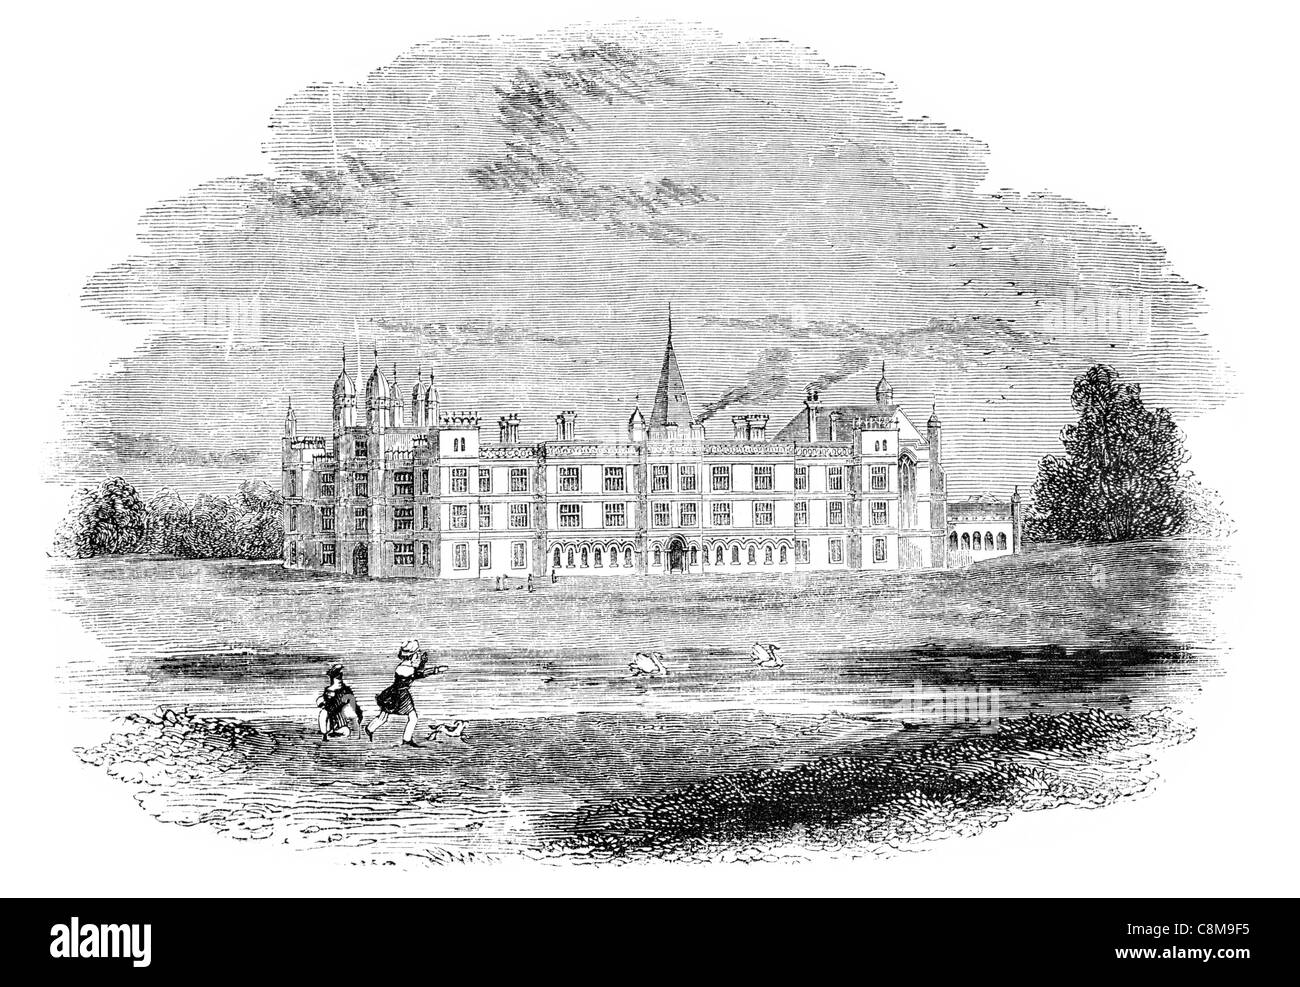 16e siècle Burghley House country house Stamford, Lincolnshire Banque D'Images